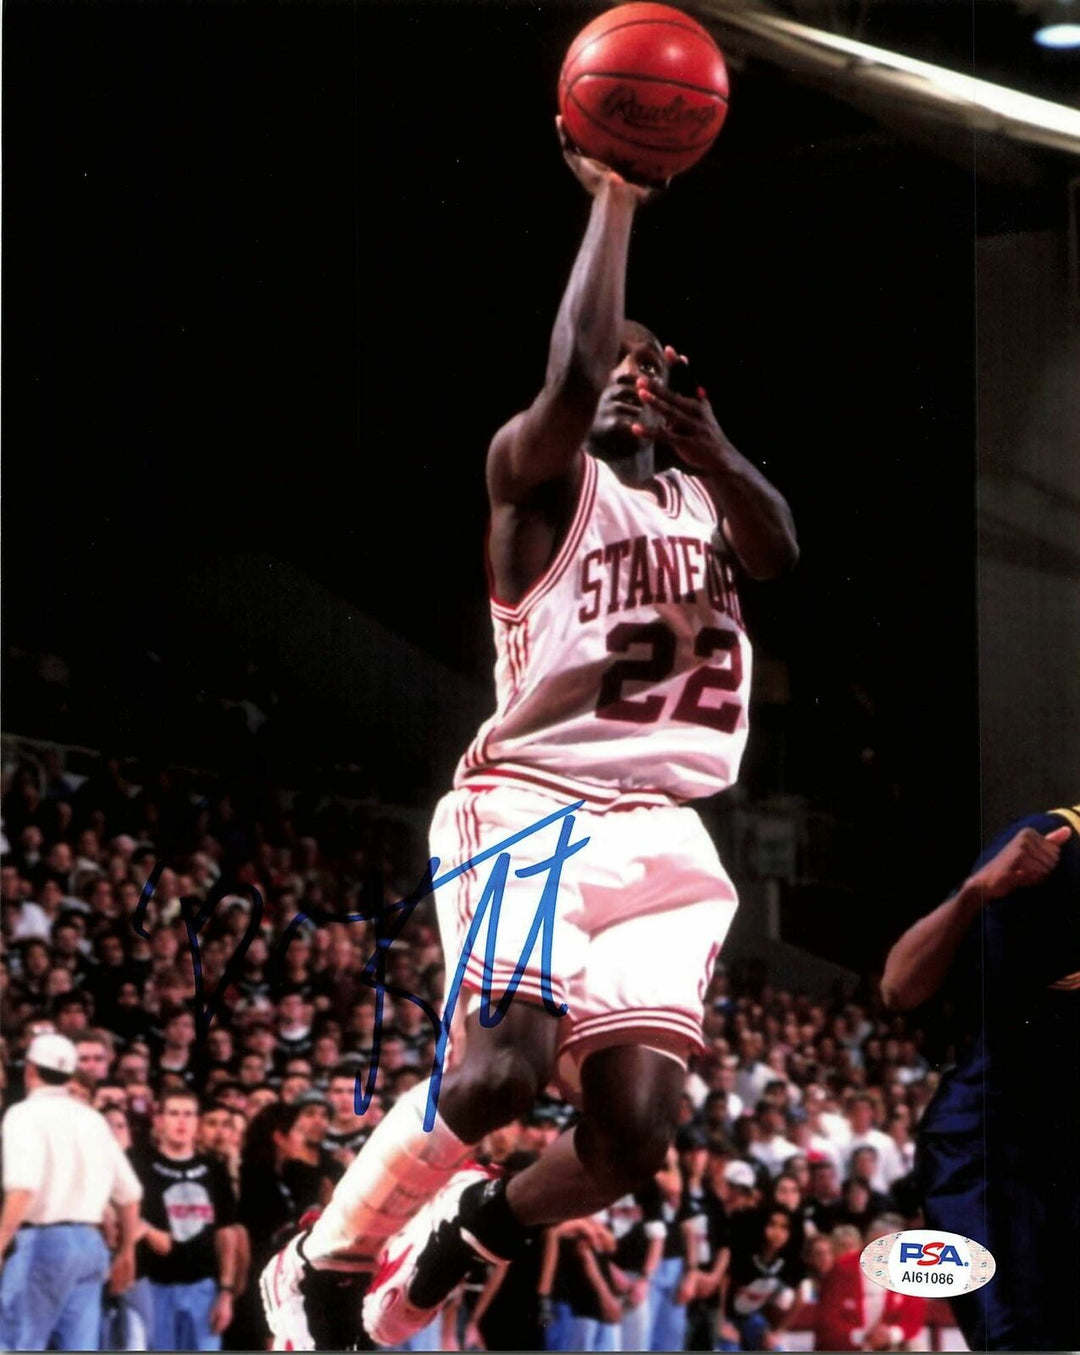 BREVIN KNIGHT signed 8x10 photo PSA/DNA Stanford Autographed Image 1